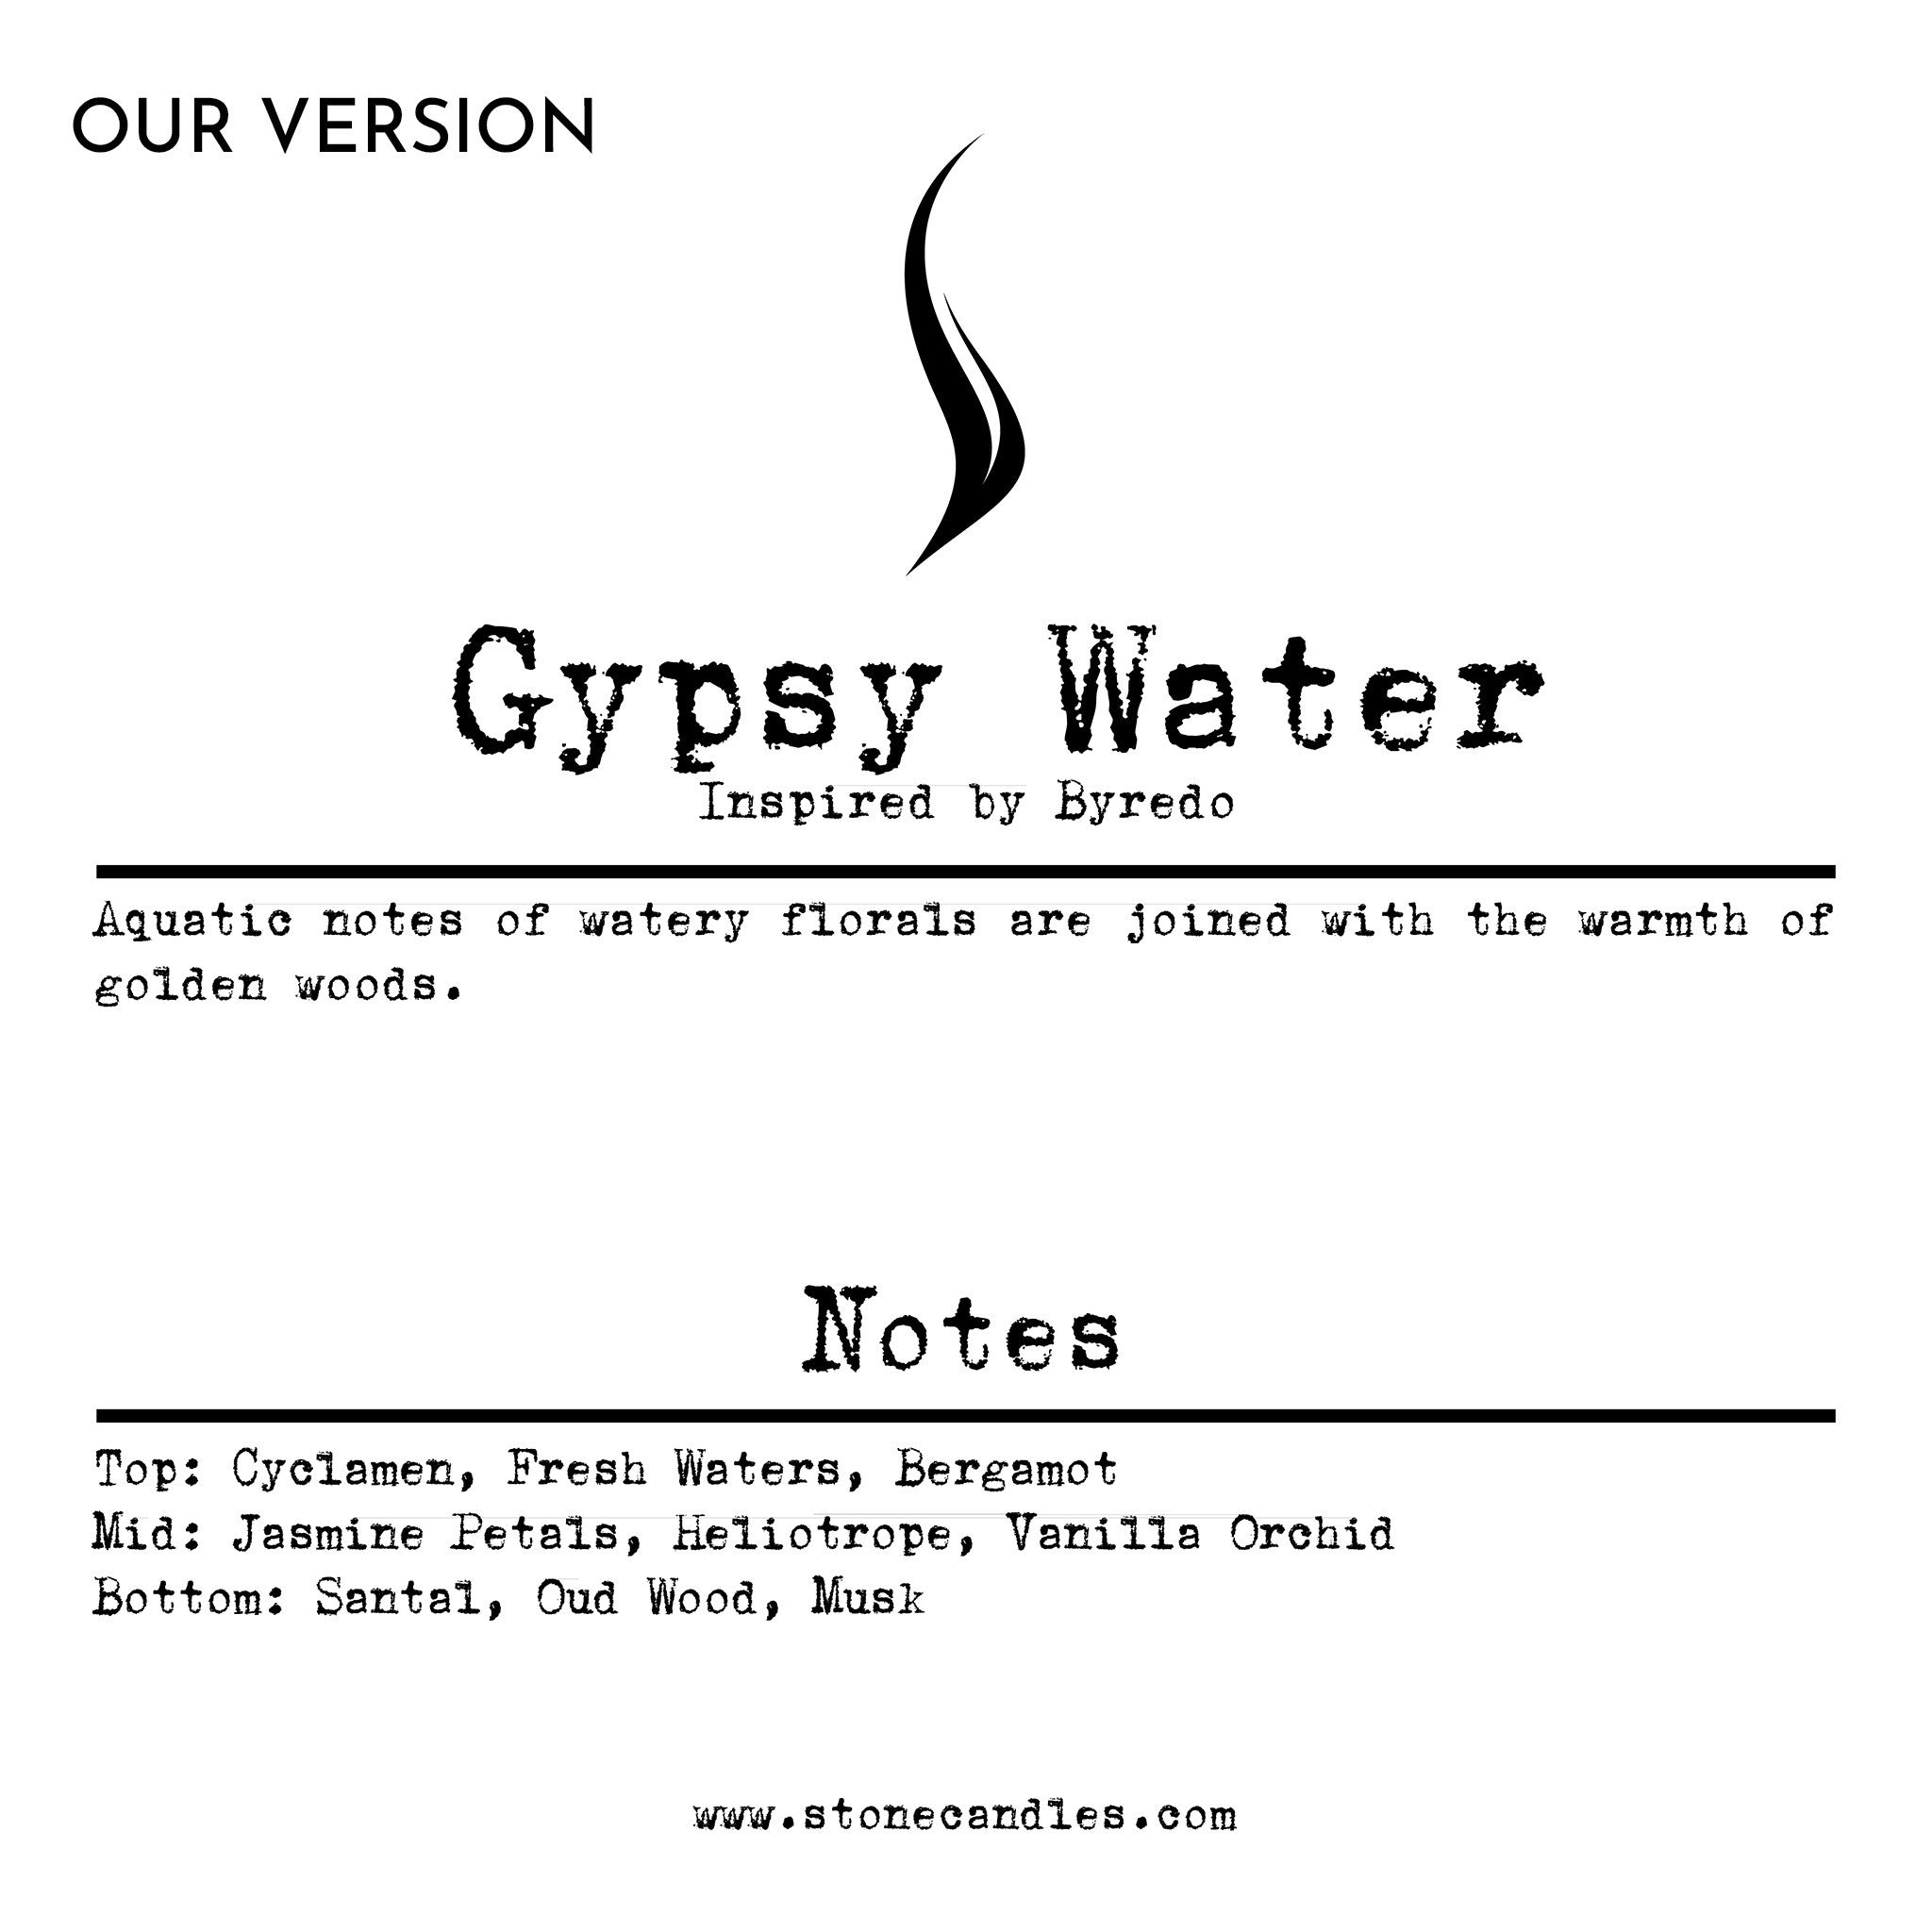 Gypsy Water (our version) Sample Scent Strip